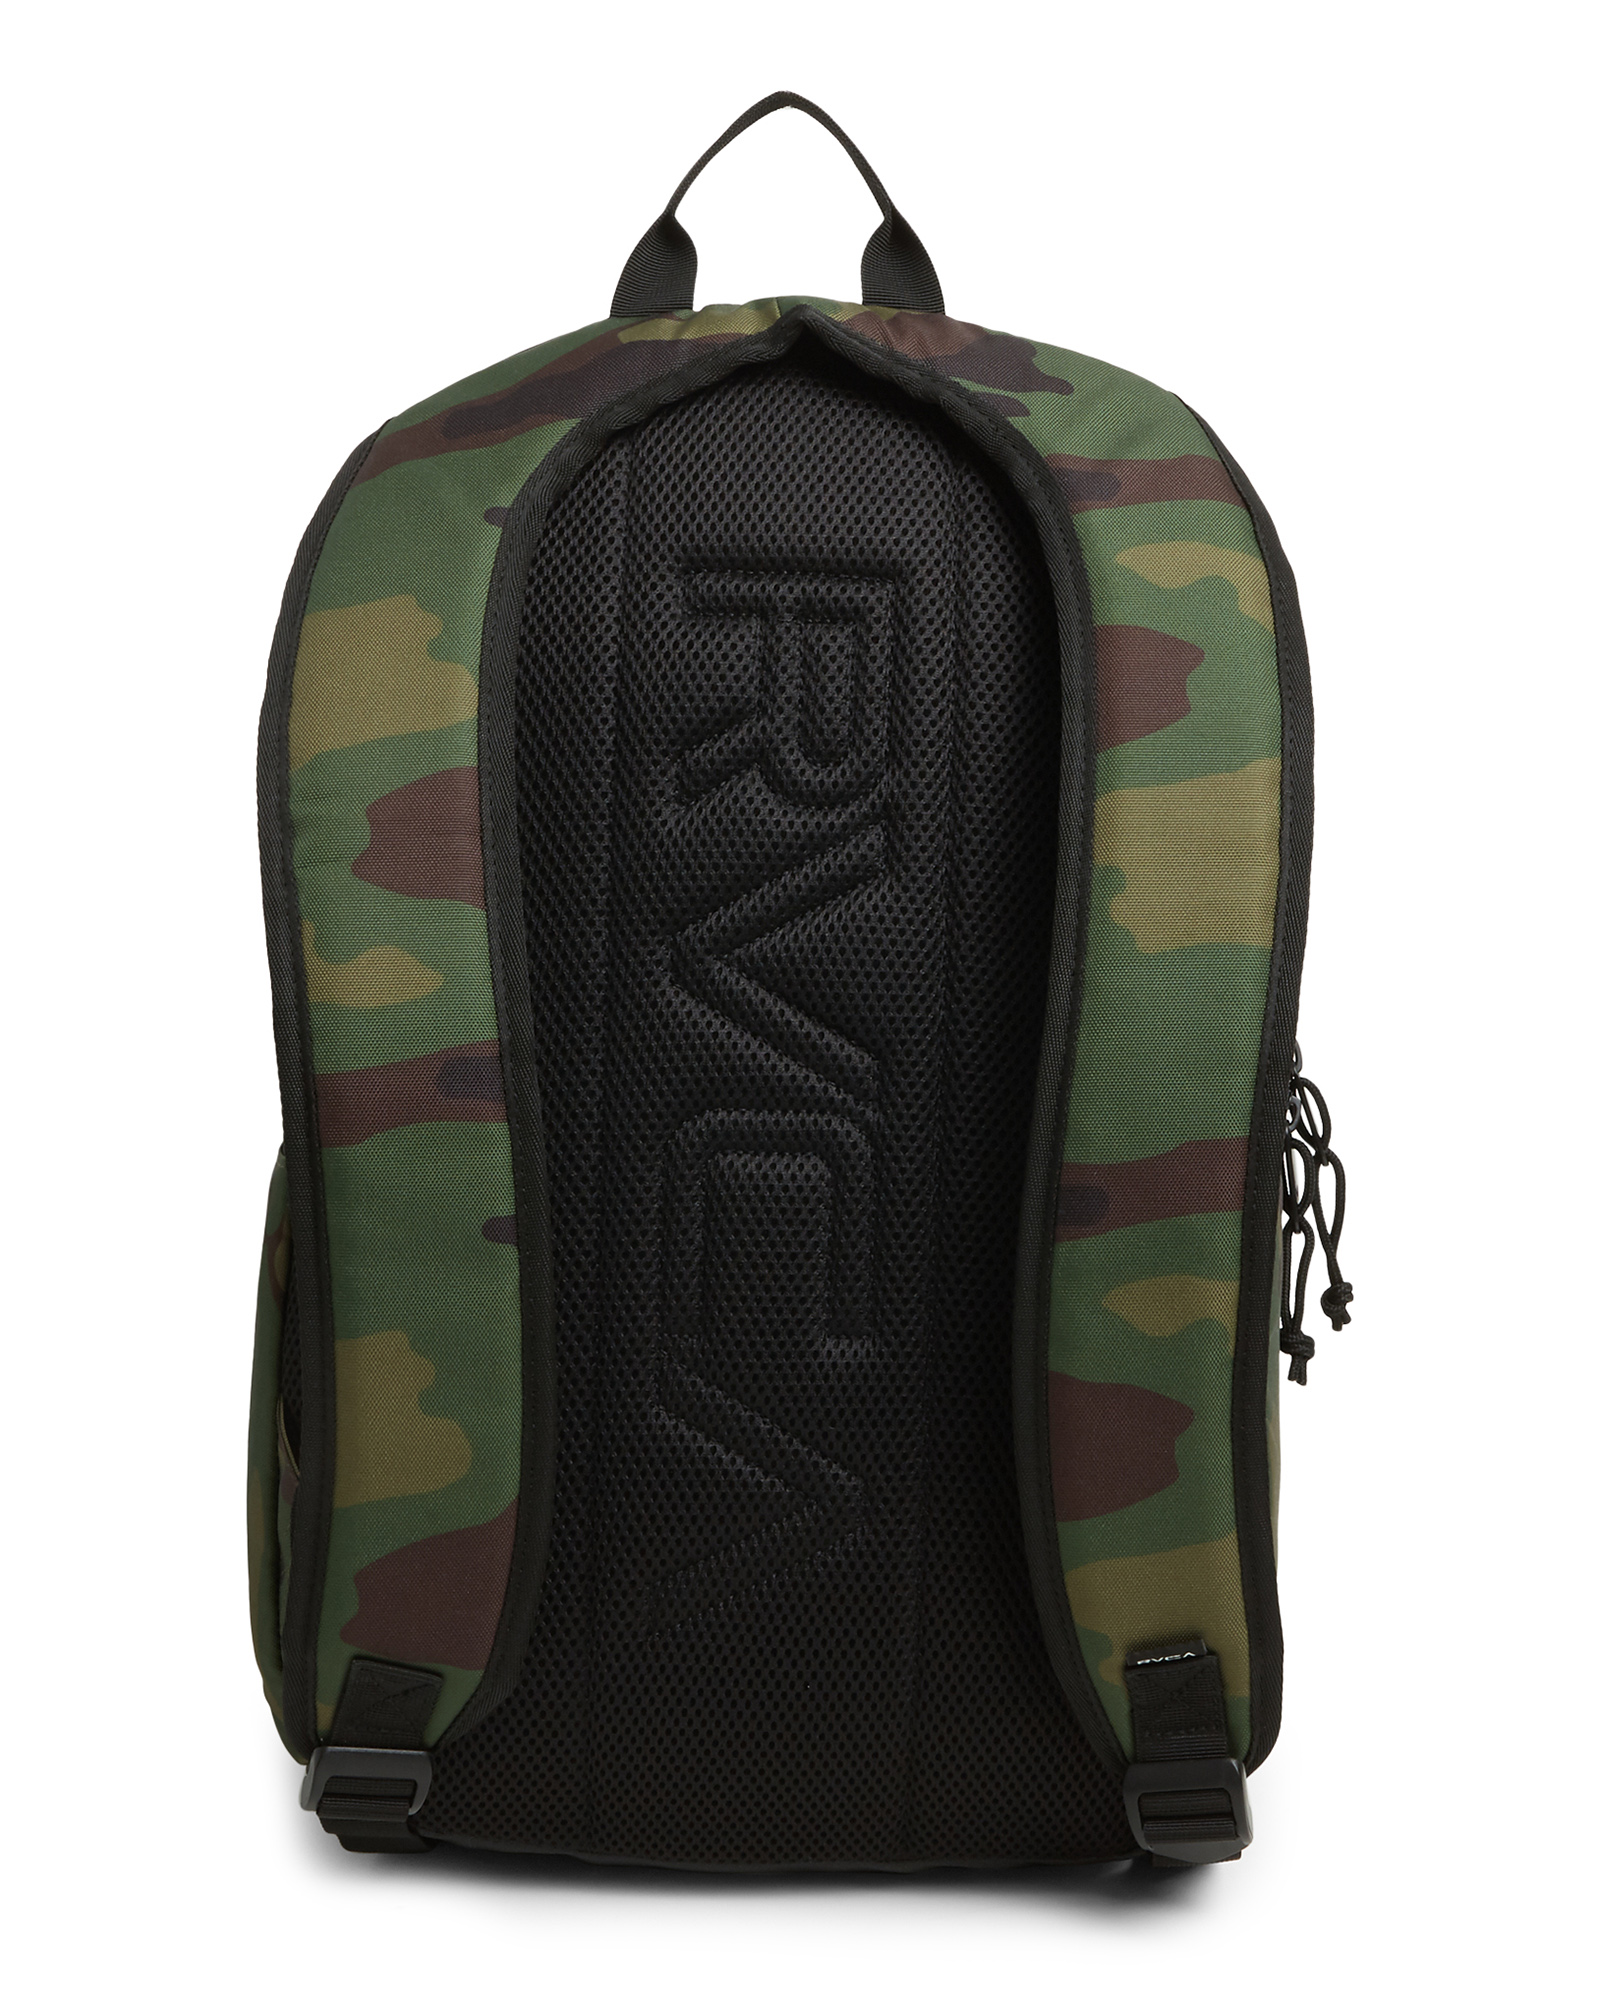 Rvca Rvca Down The Line Backpack - Camo | SurfStitch